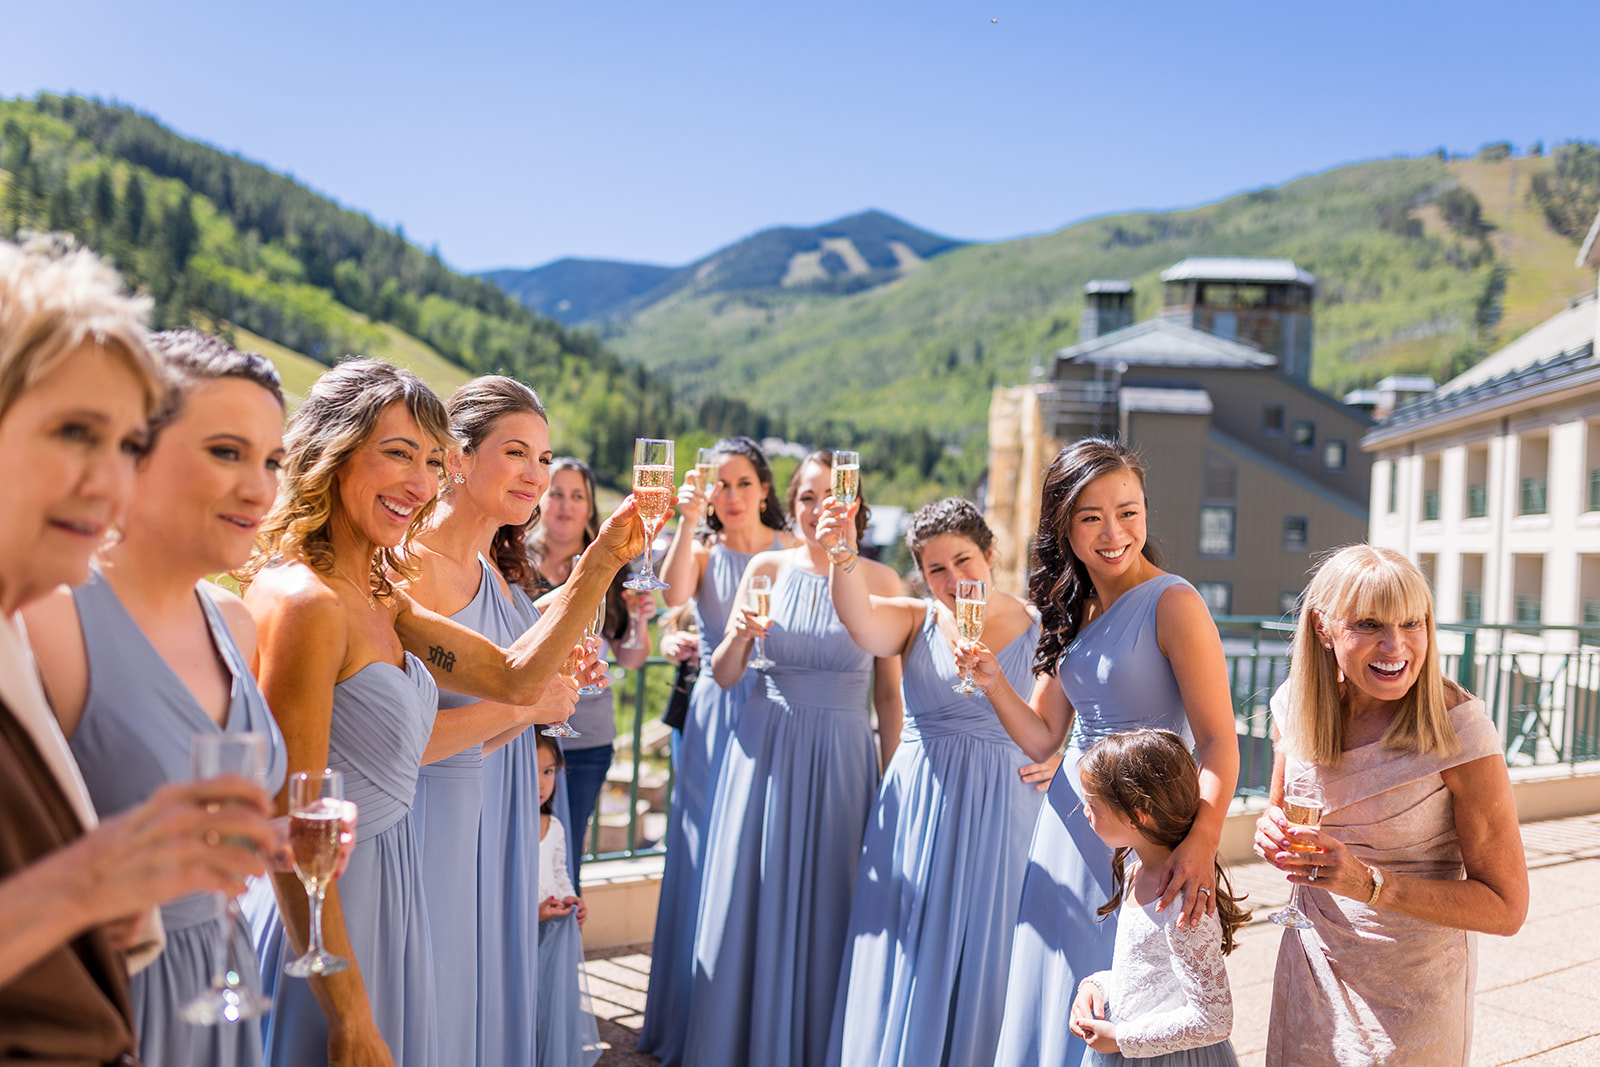 Bridesmaids celebrate with glasses of champagne.